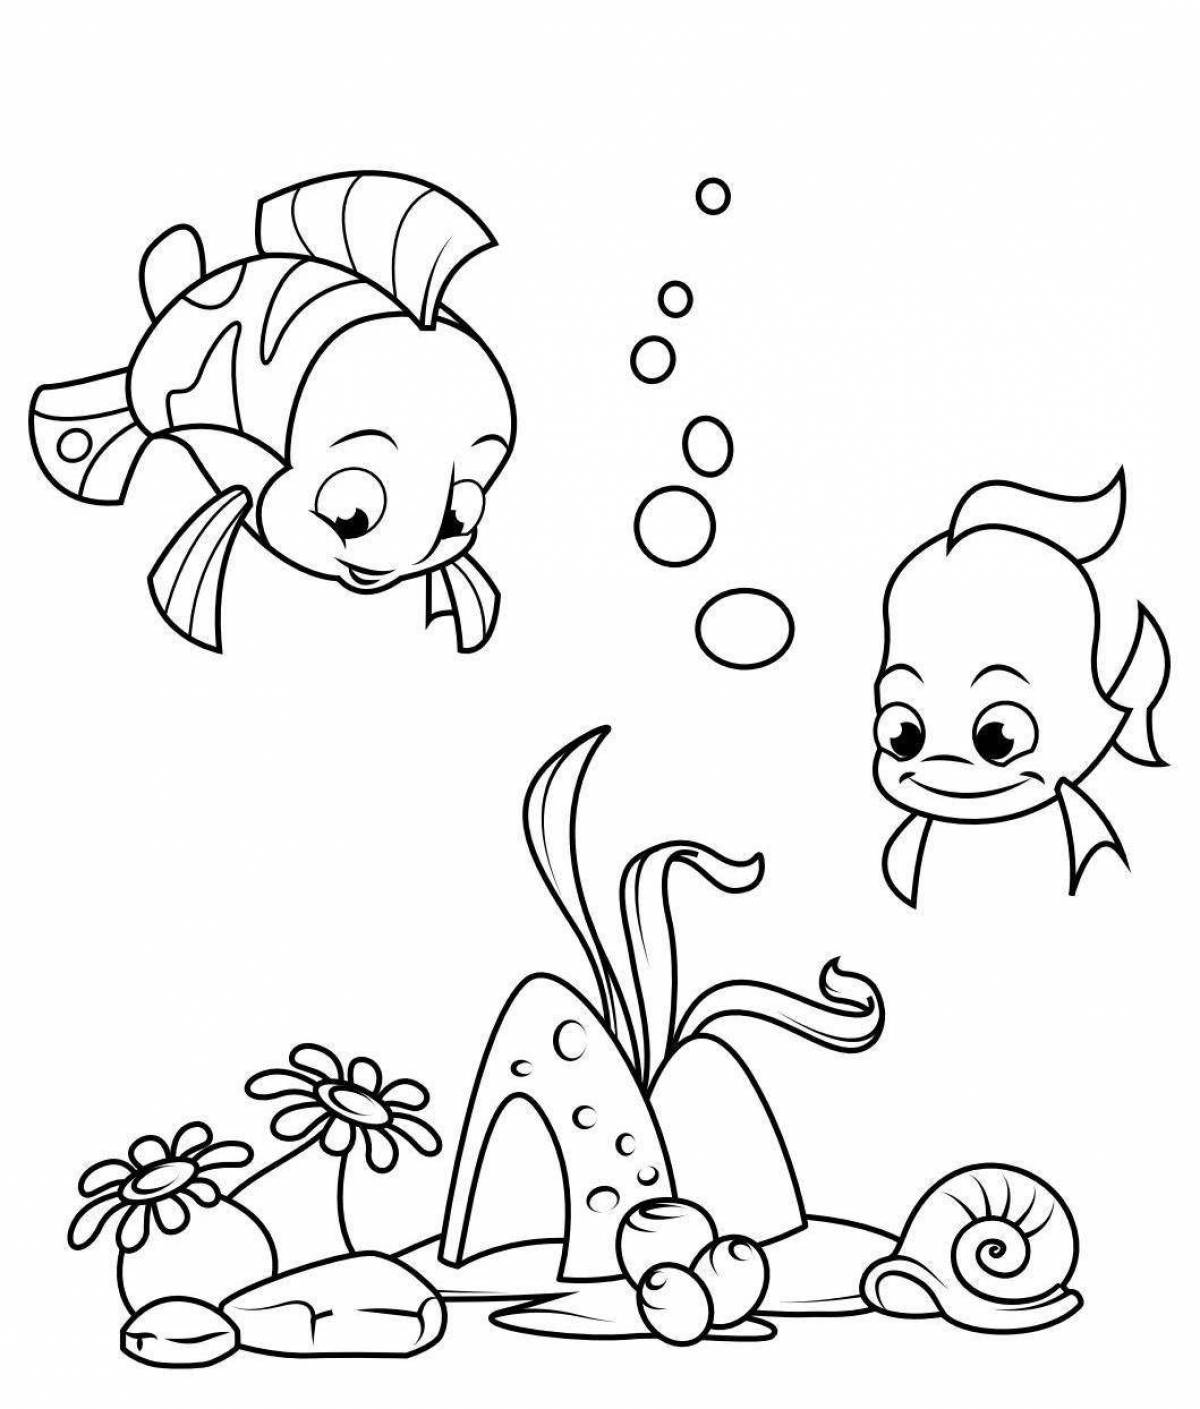 Coloring page dazzling guppies